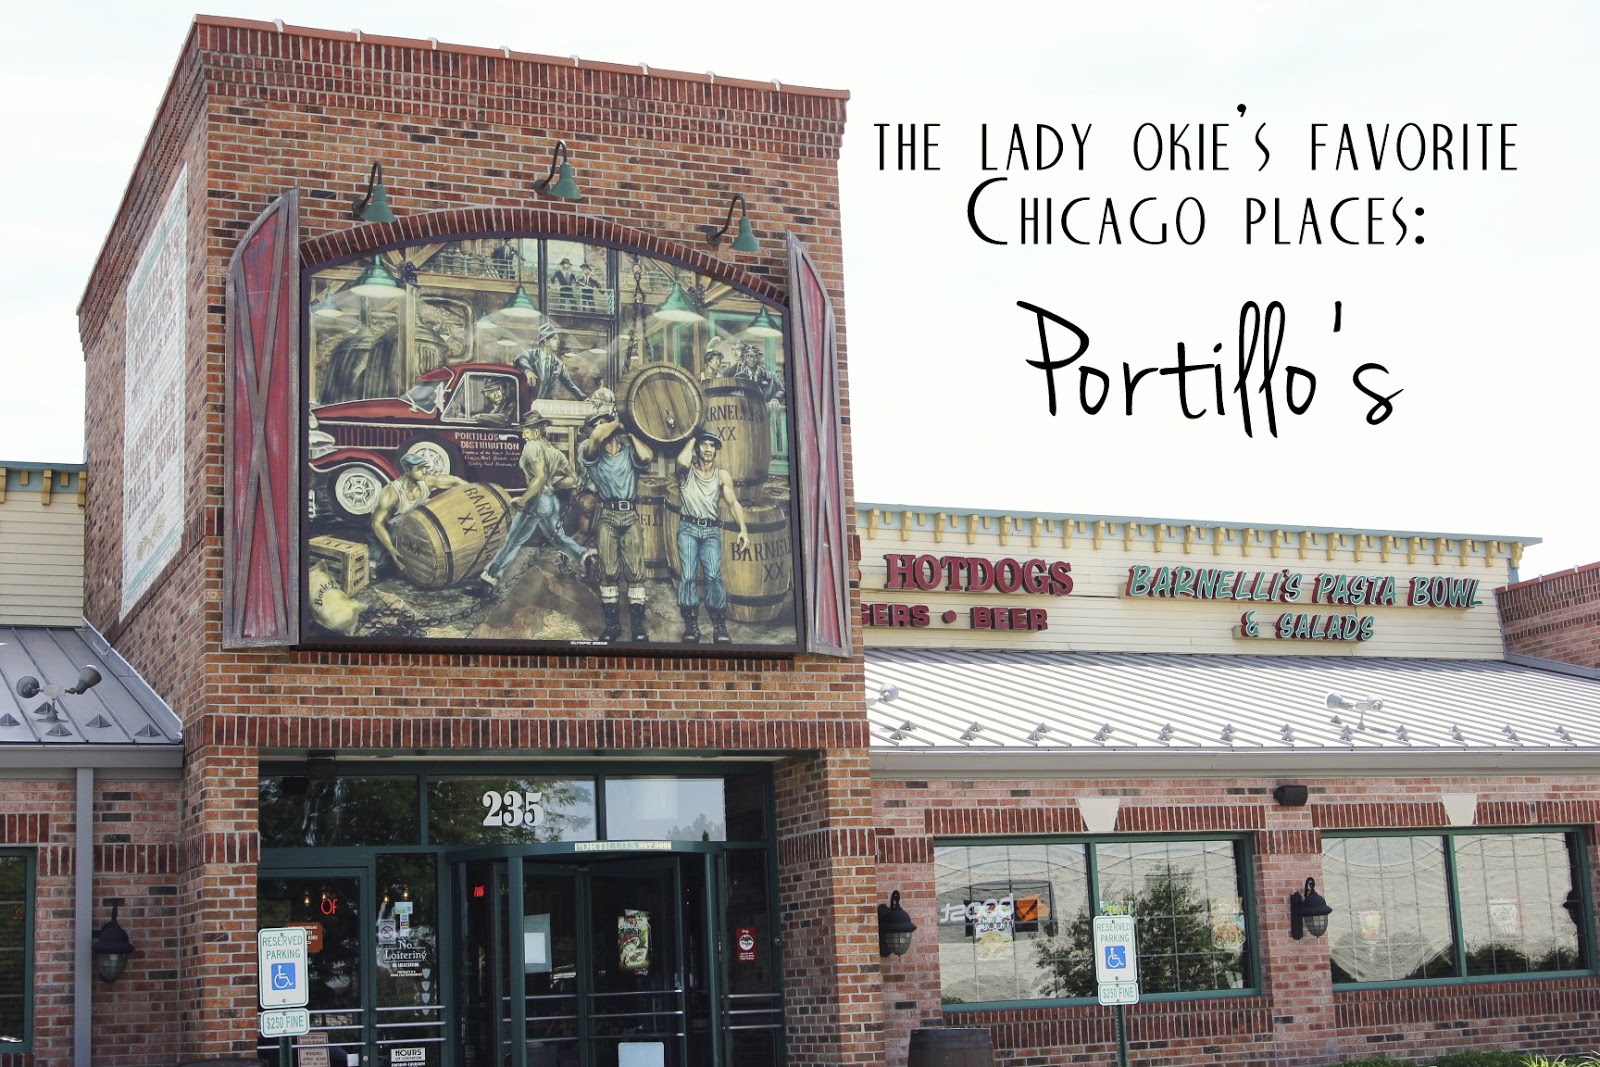 The Lady Okie: My Favorite Chicago Places: Portillo's Restaurant